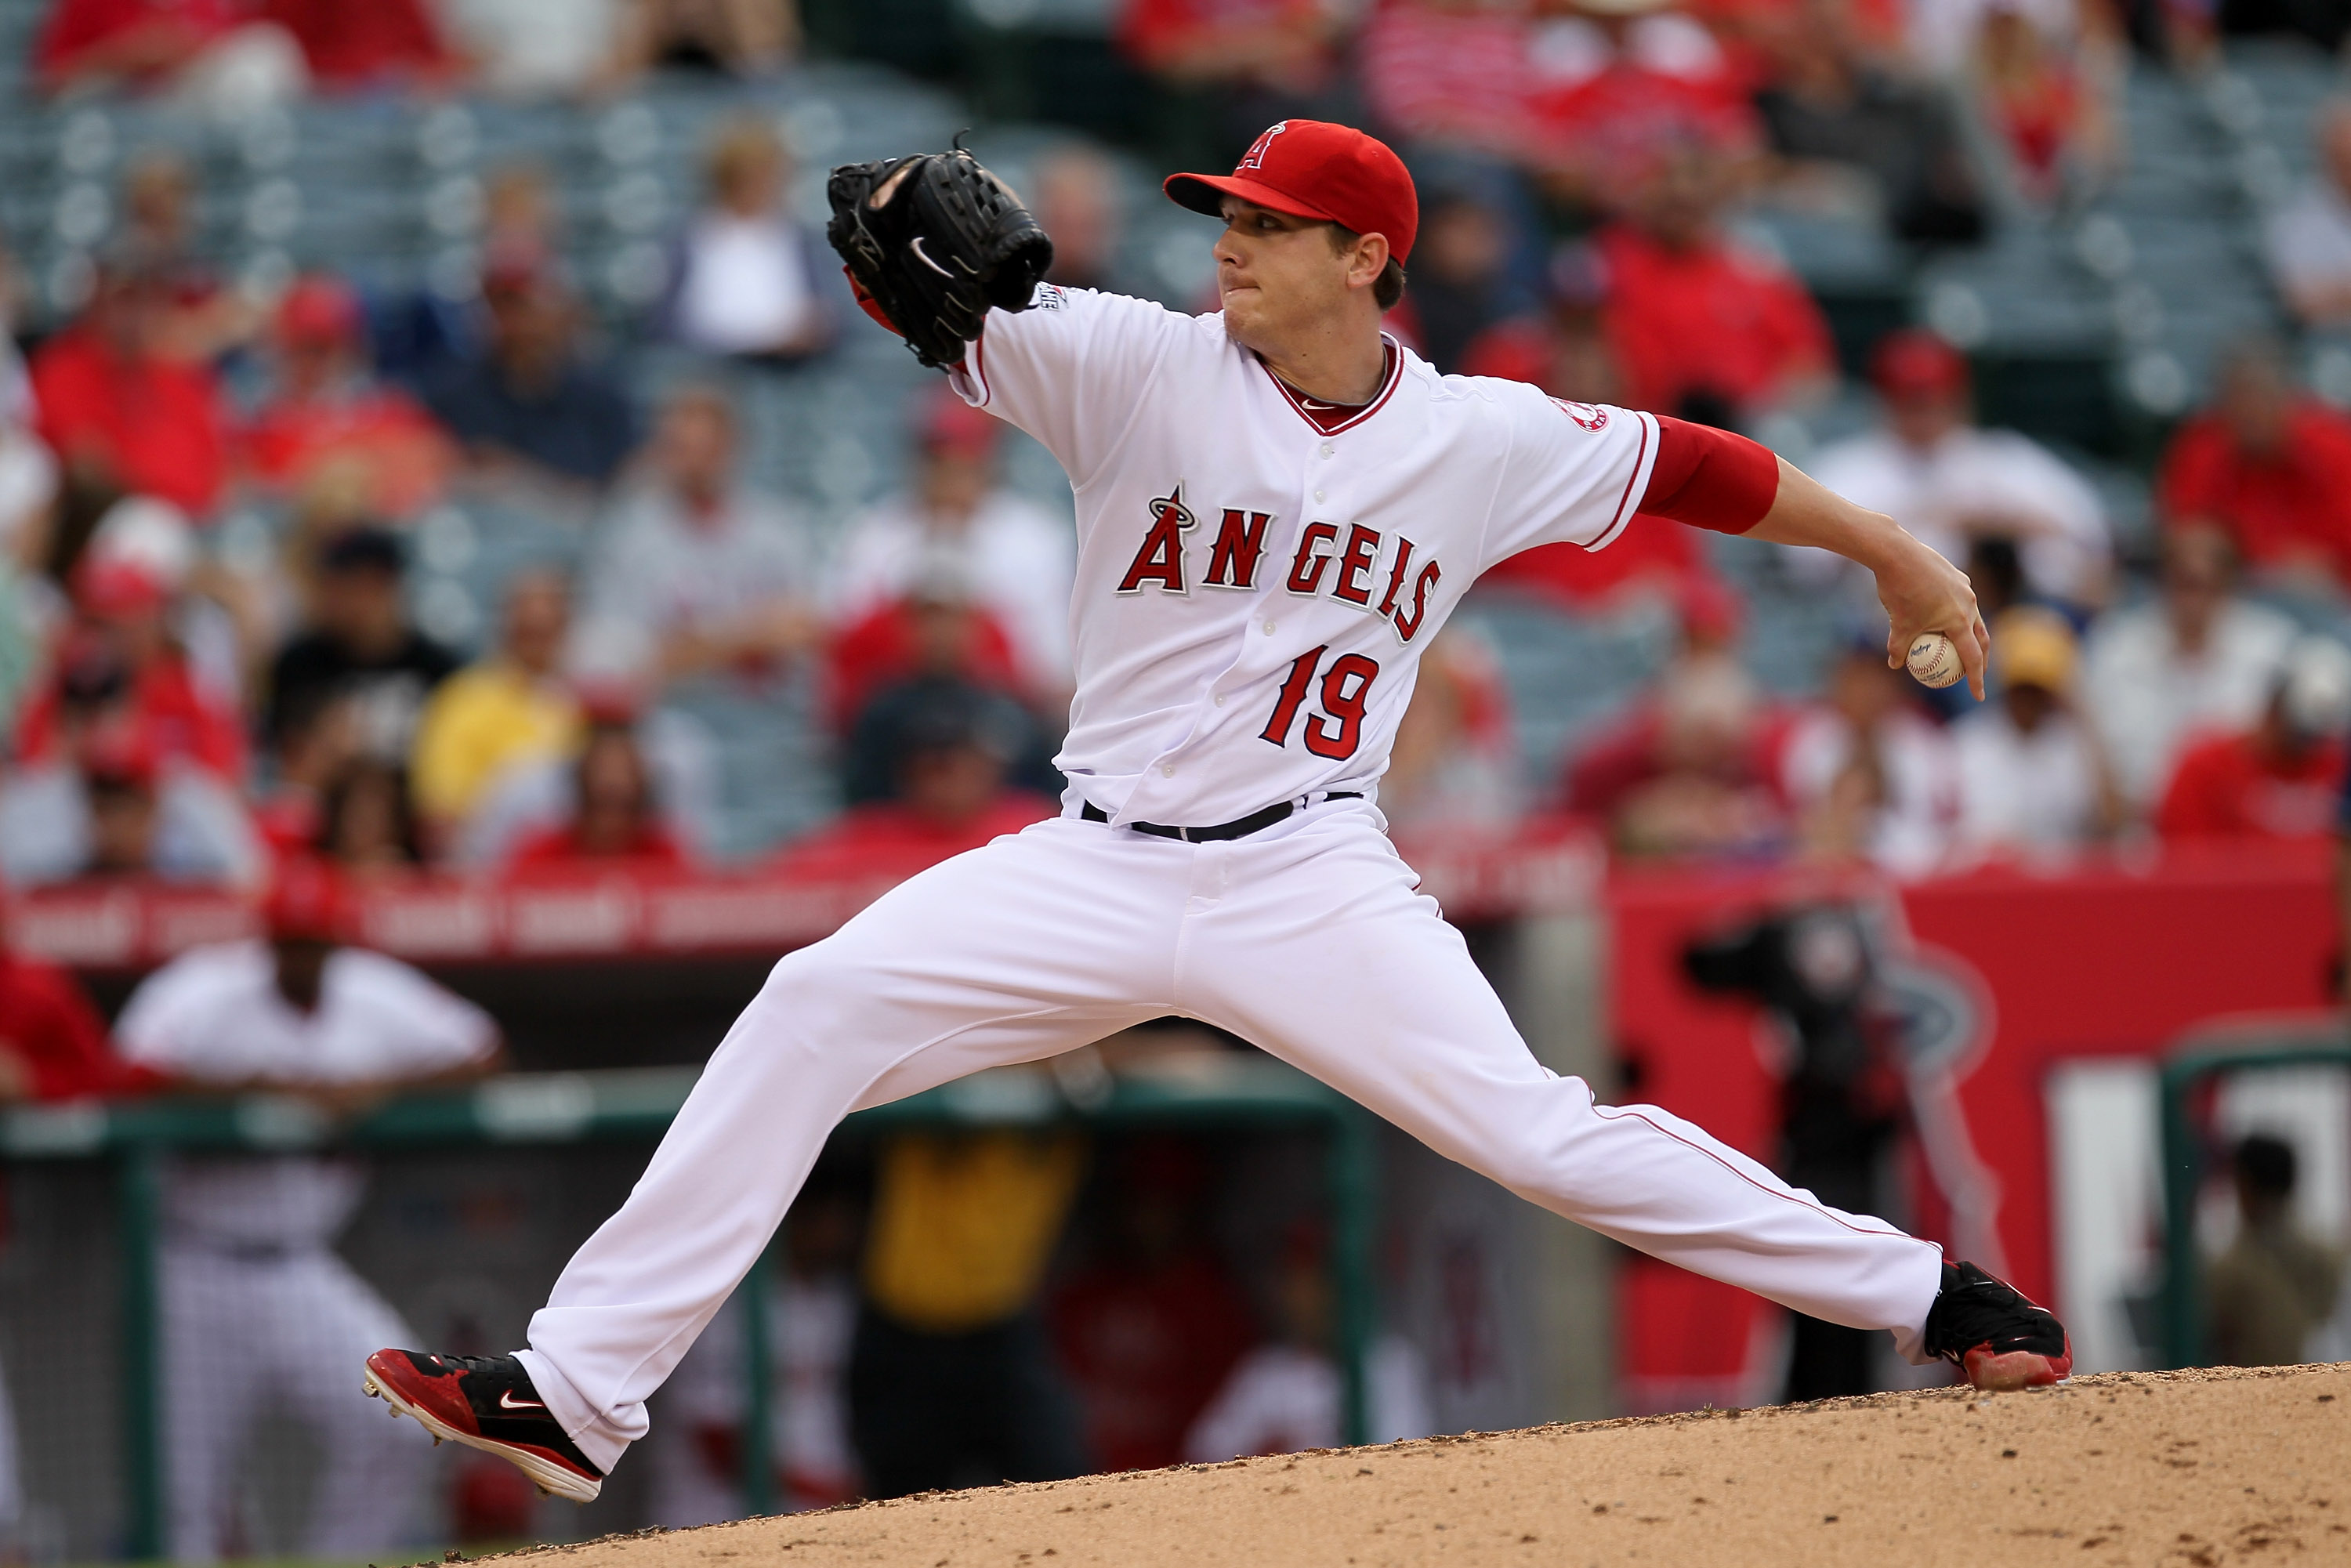 ANAHEIM, CA - SEPTEMBER 08:  Scott Zazmir #19 of the Los Angeles Angels of Anaheim throws a pitch against the Cleveland Indians on September 8, 2010 at Angel Stadium in Anaheim, California.  (Photo by Stephen Dunn/Getty Images)